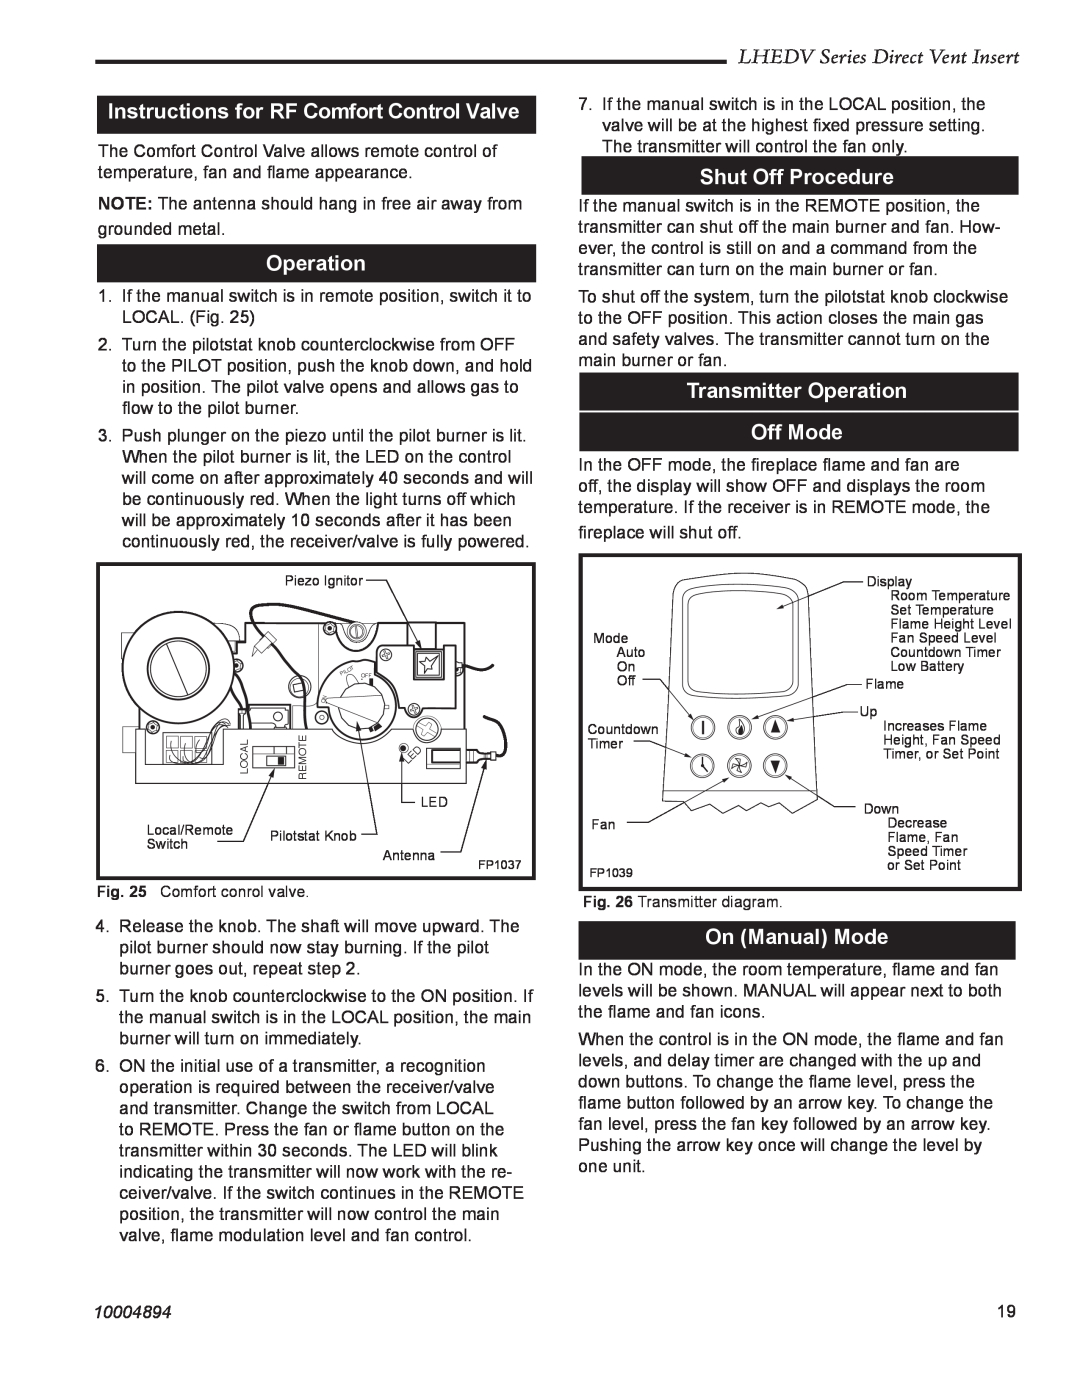 Vermont Casting LHECDV20 manual Instructions for RF Comfort Control Valve, Operation, Shut Off Procedure, On Manual Mode 